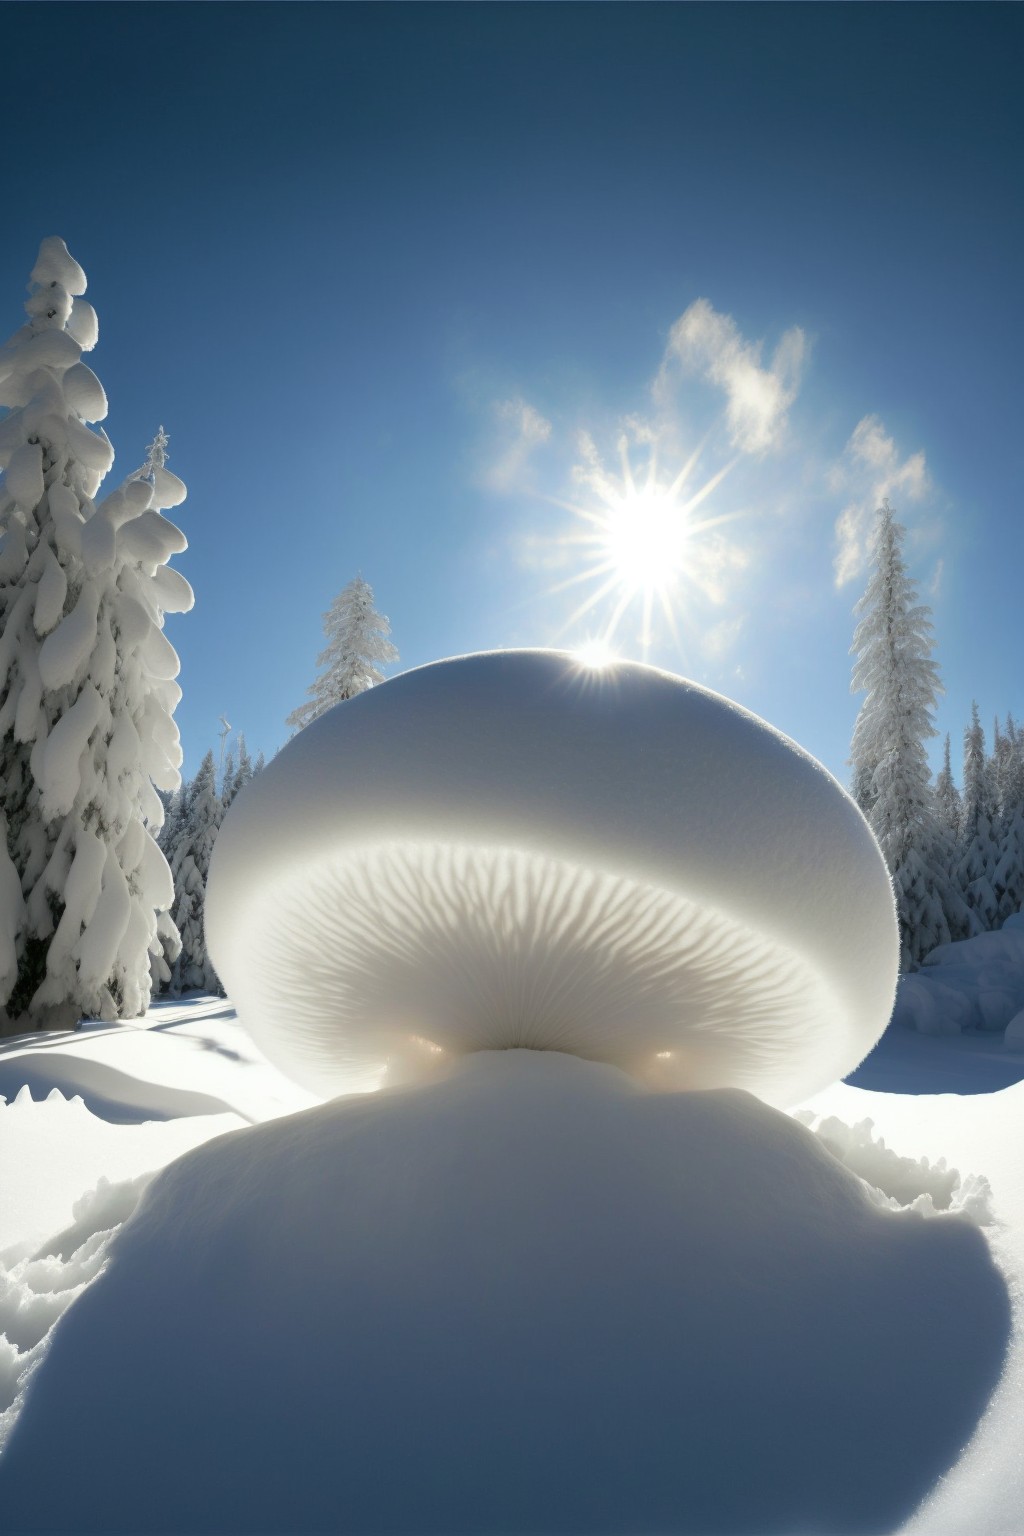 6 images of Huge snowdrift mushroom found in snow by Midjourney